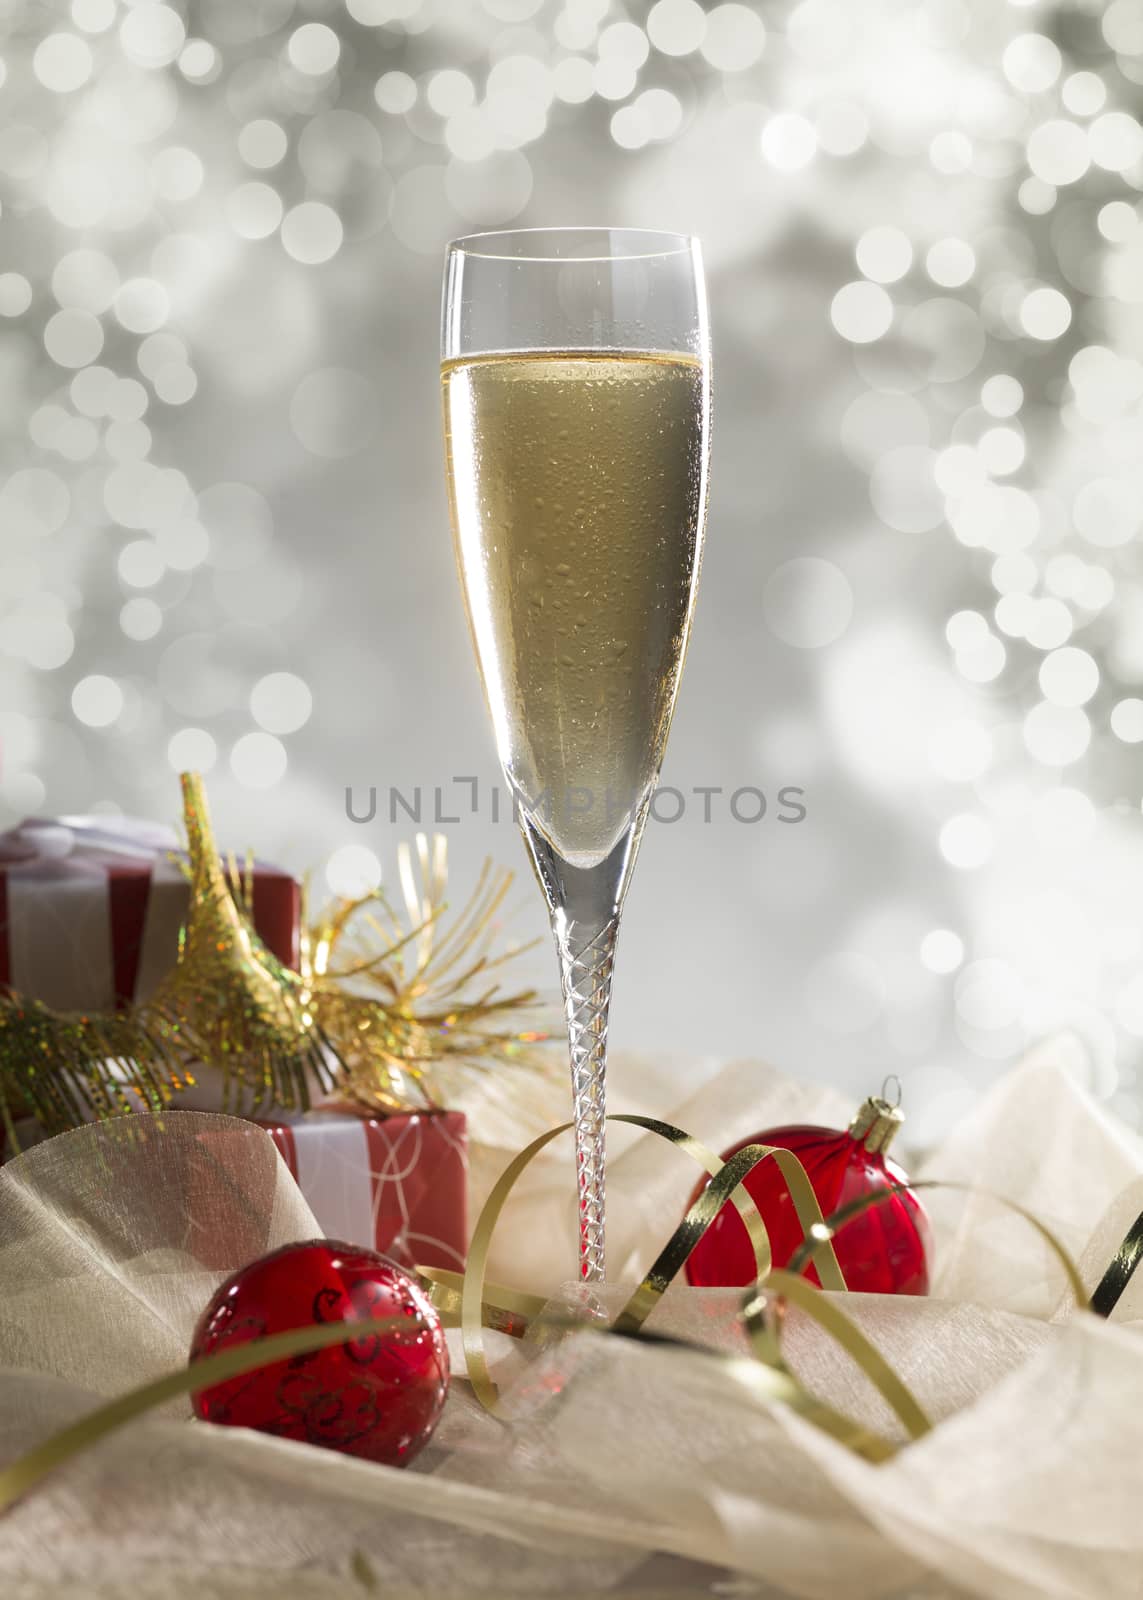 Luxury champagne glass, gift and decoration on an abstract grey  by janssenkruseproductions